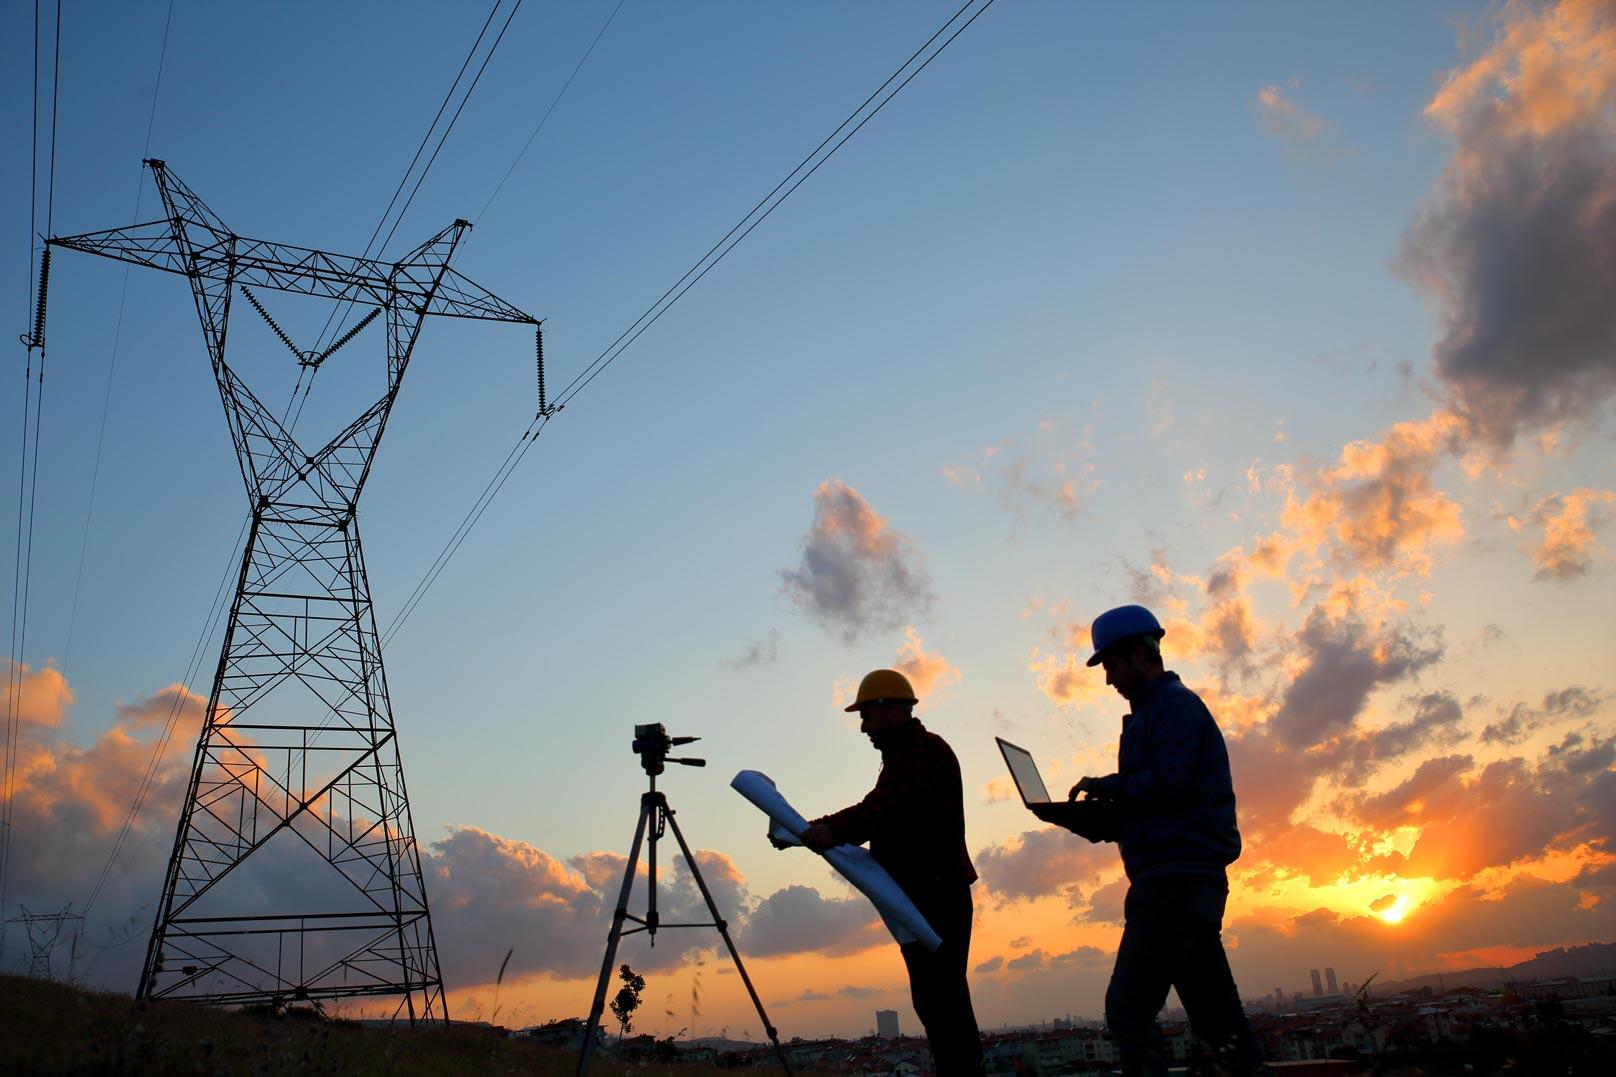 Workers stand near power lines with a bright sky behind them.